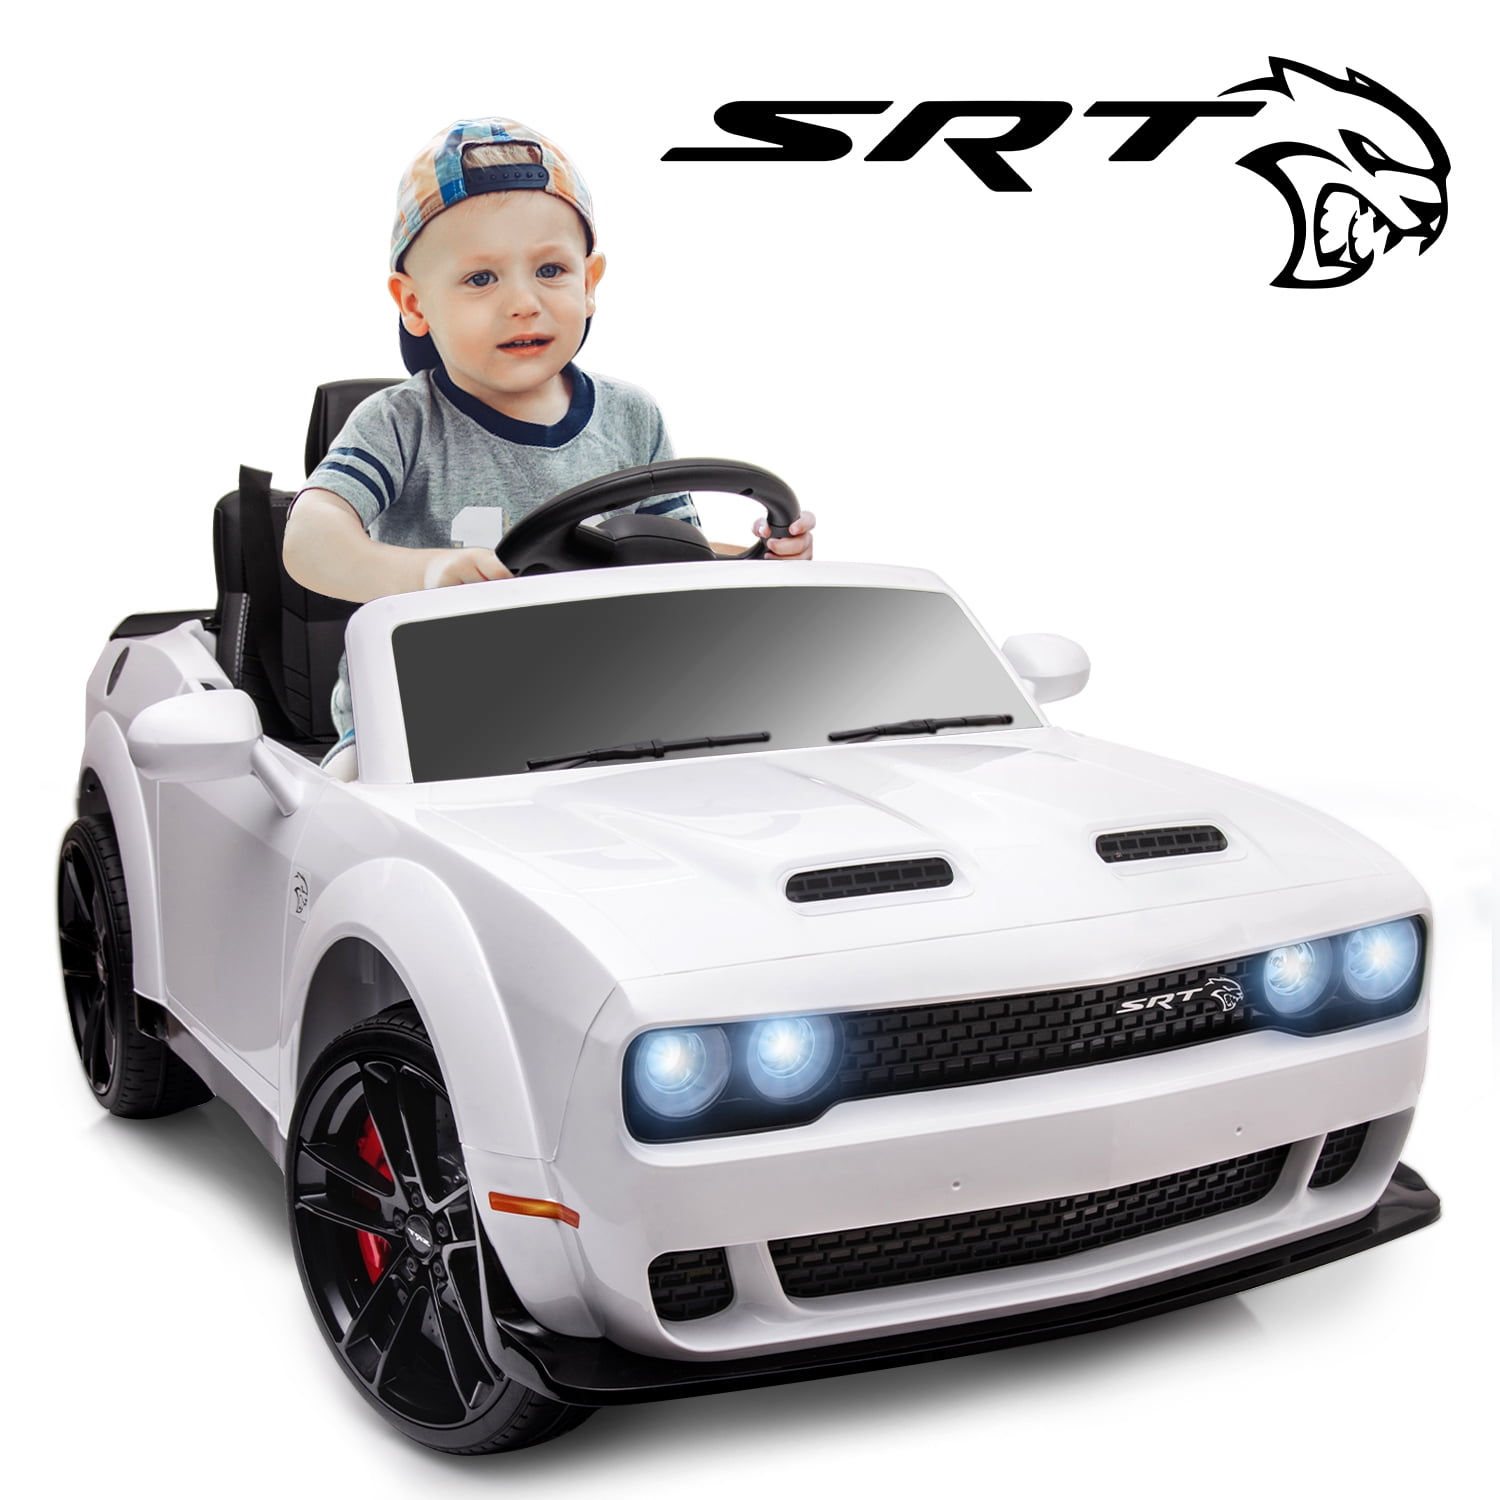 Track 7 Kids Ride on Car,Licensed Dodge Challenger SRT 12V Powered Electric Car for Kids,Electric Vehicles for Boys Girls,Kids Car with Remote,MP3,Bluetooth,Lights,White